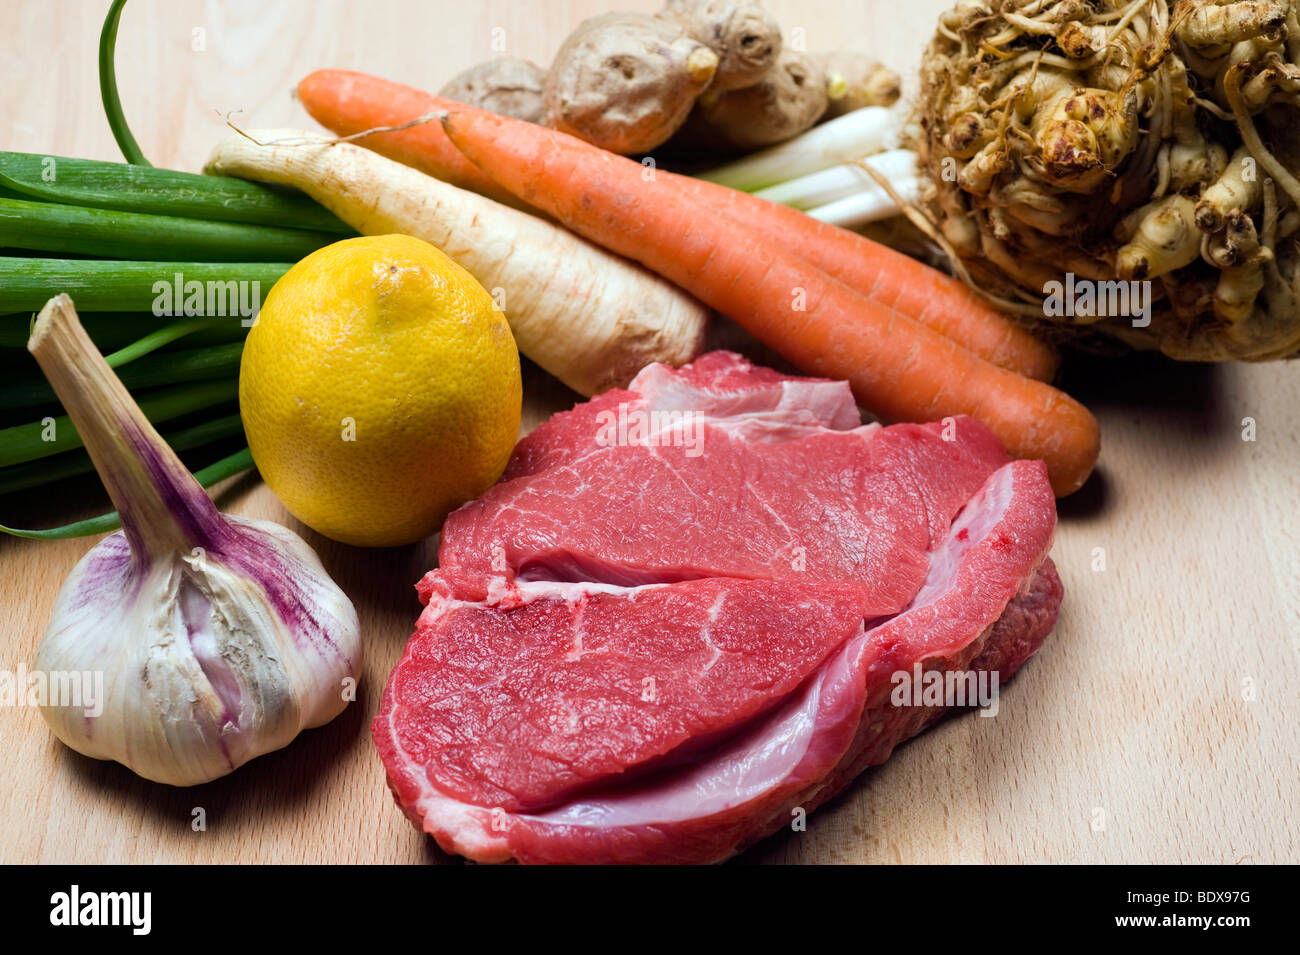 Beef and vegetables, ingredients for a clear beef broth Stock Photo